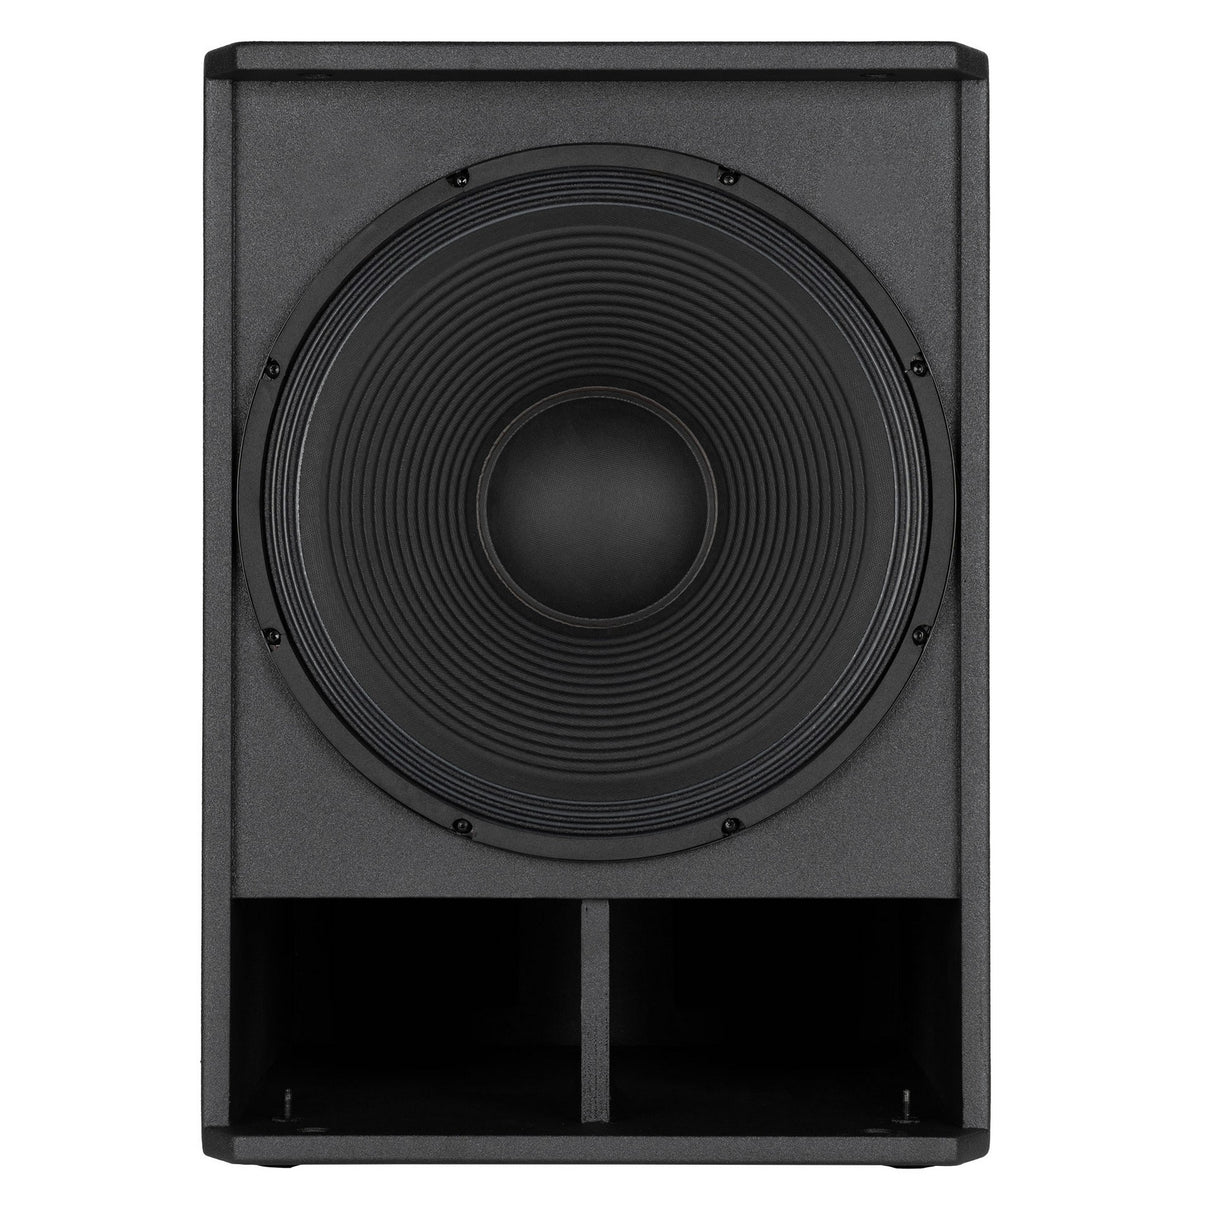 RCF SUB 905-AS MK3 15-Inch Self-Powered Extended Low-Frequency Subwoofer